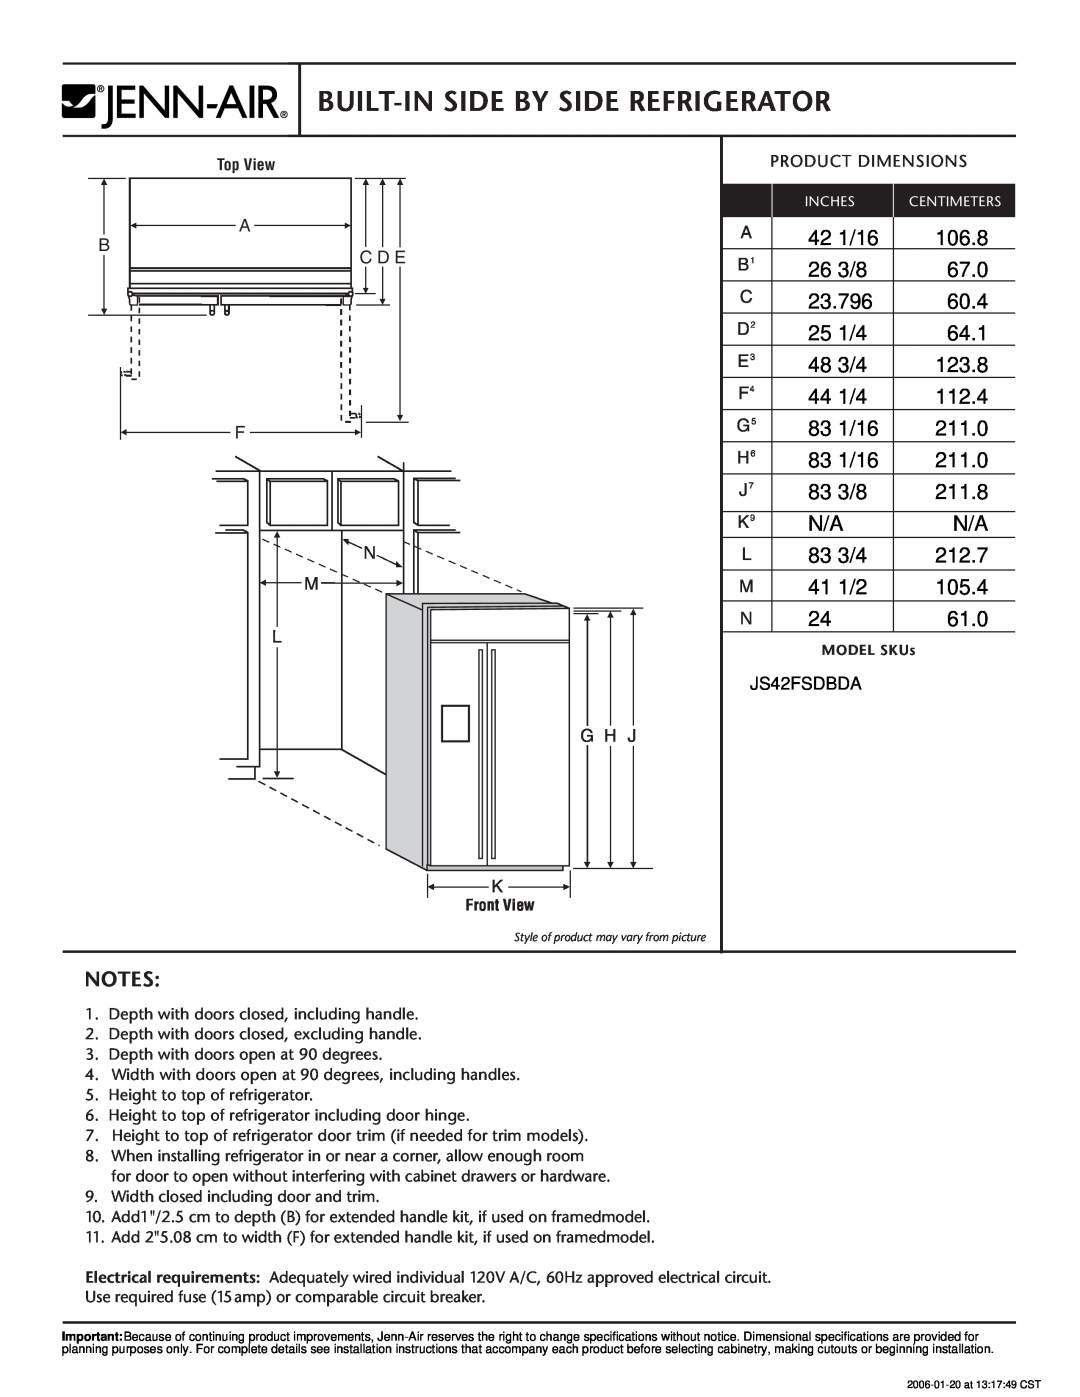 Jenn-Air JS42FSDBDA dimensions Built-In Side By Side Refrigerator, Product Dimensions 